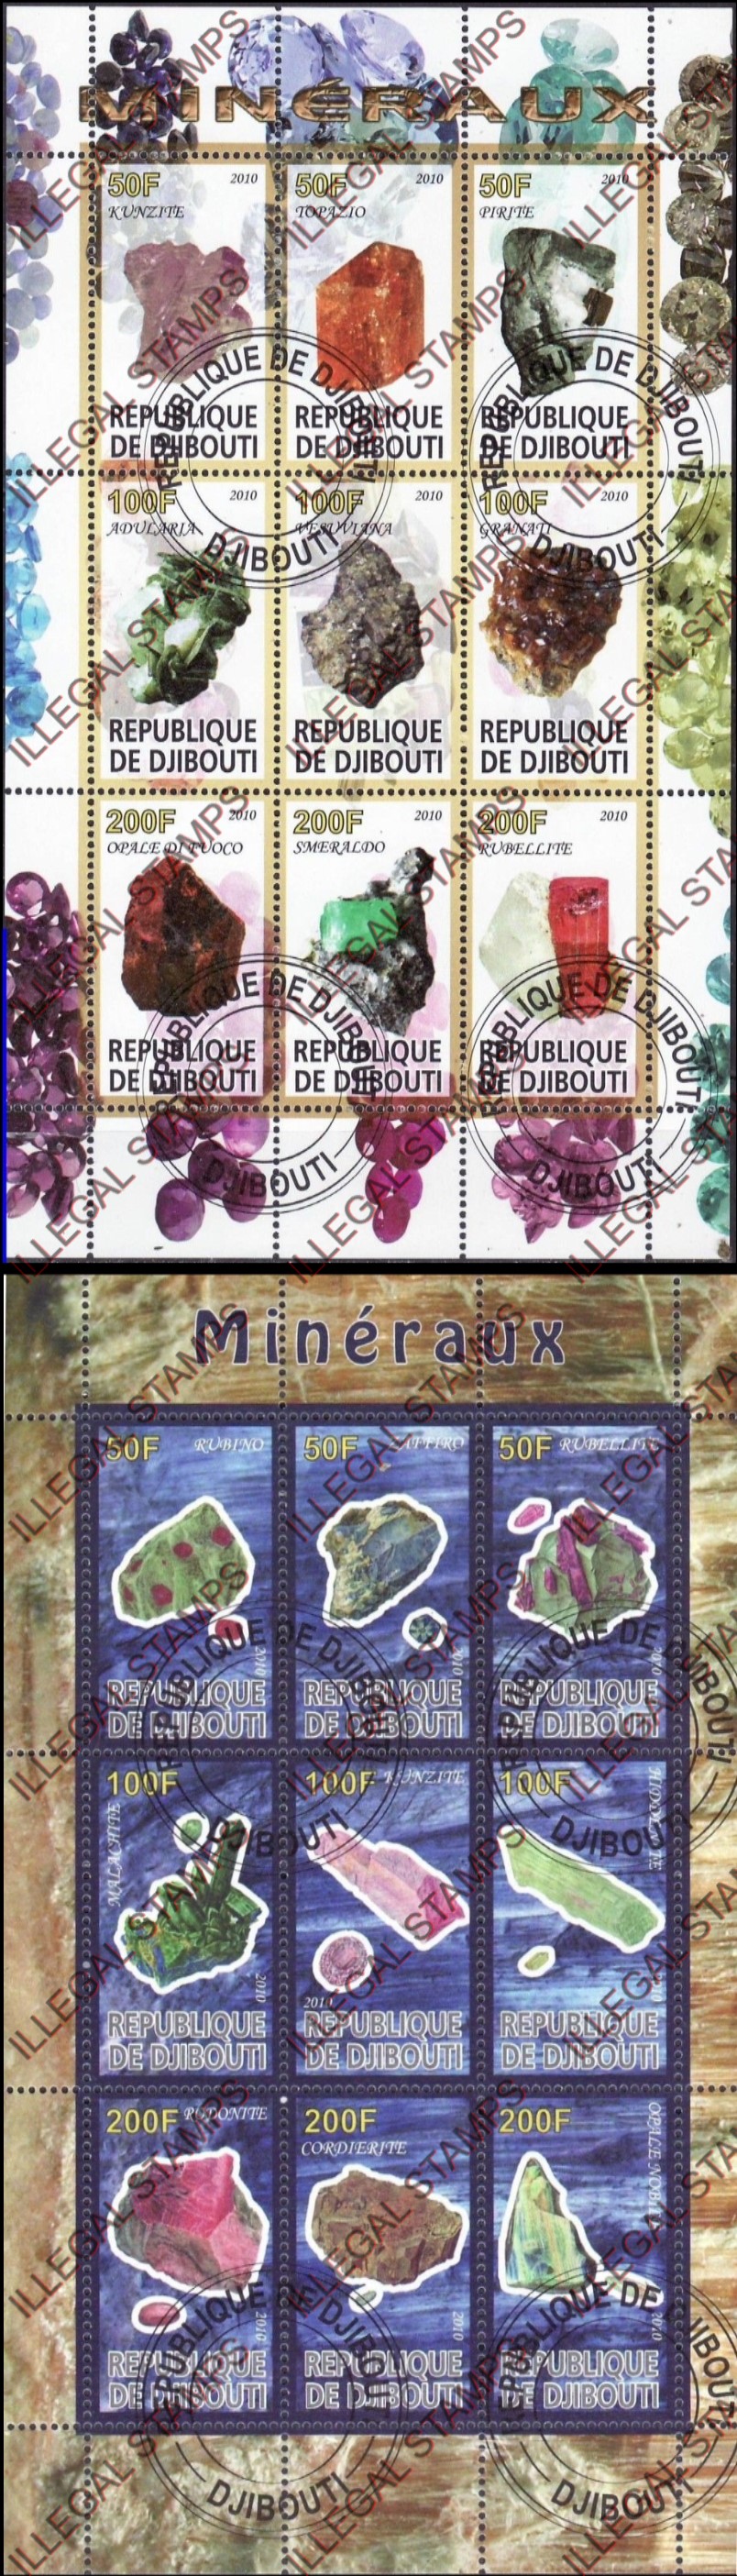 Djibouti 2010 Minerals Illegal Stamp Sheetlets of 9